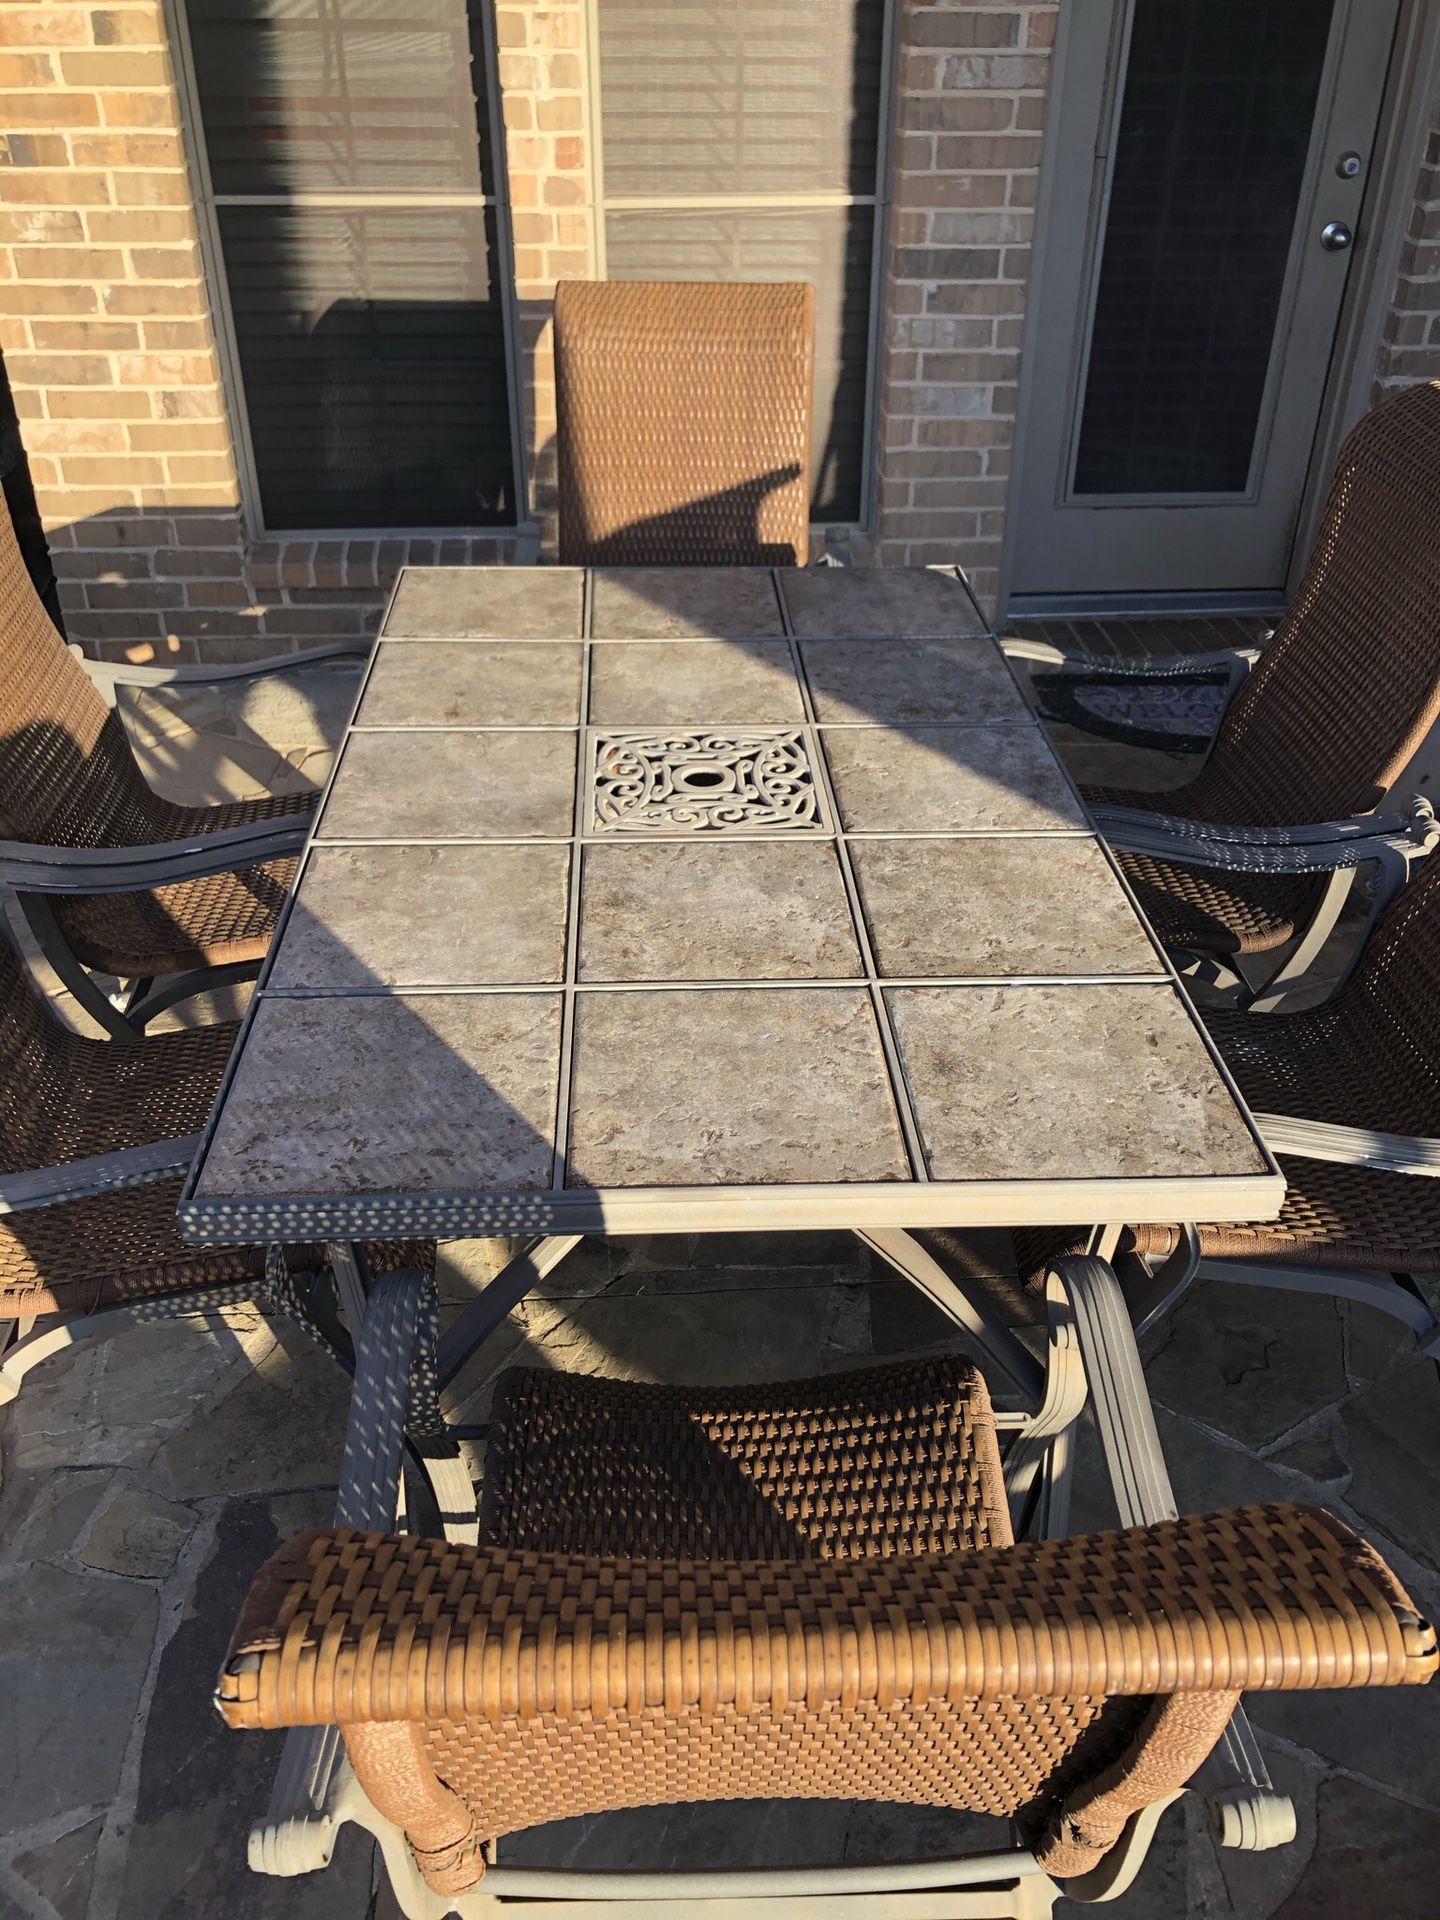 Very Nice Elegant Outdoors Patio Table And Wicker Chairs